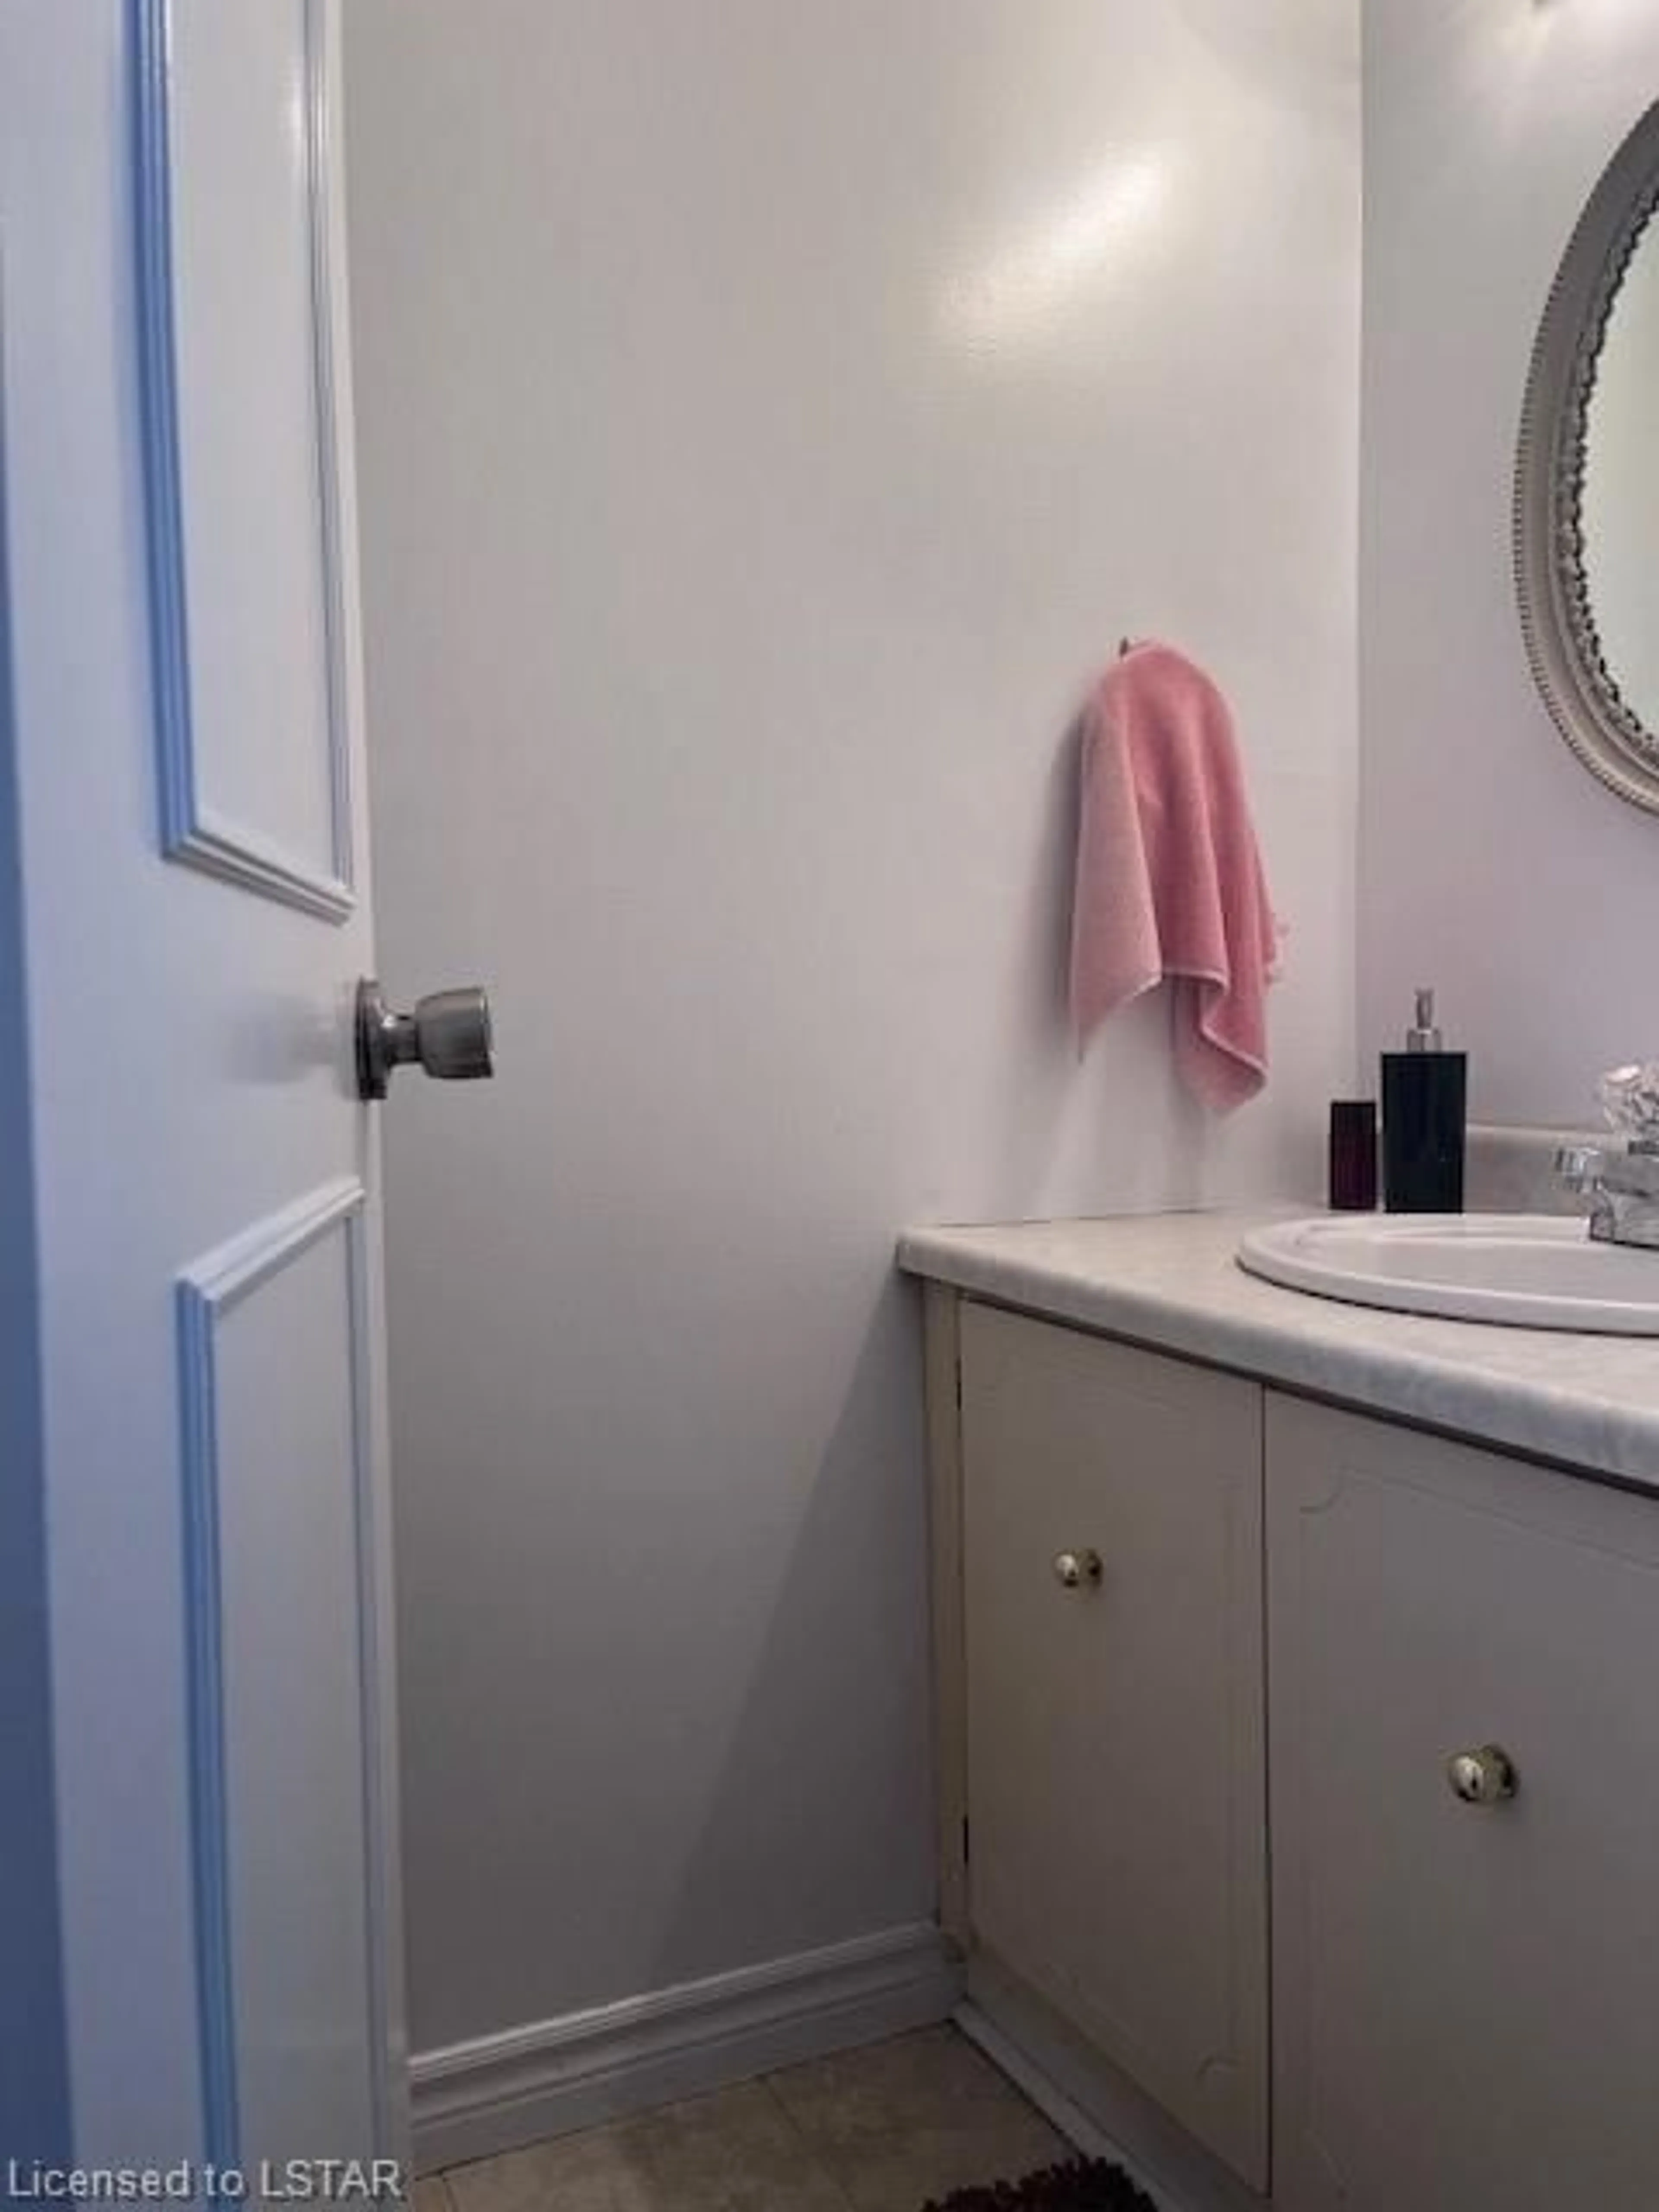 A pic of a room for 646 Wonderland Rd #54, London Ontario N6H 4Y8